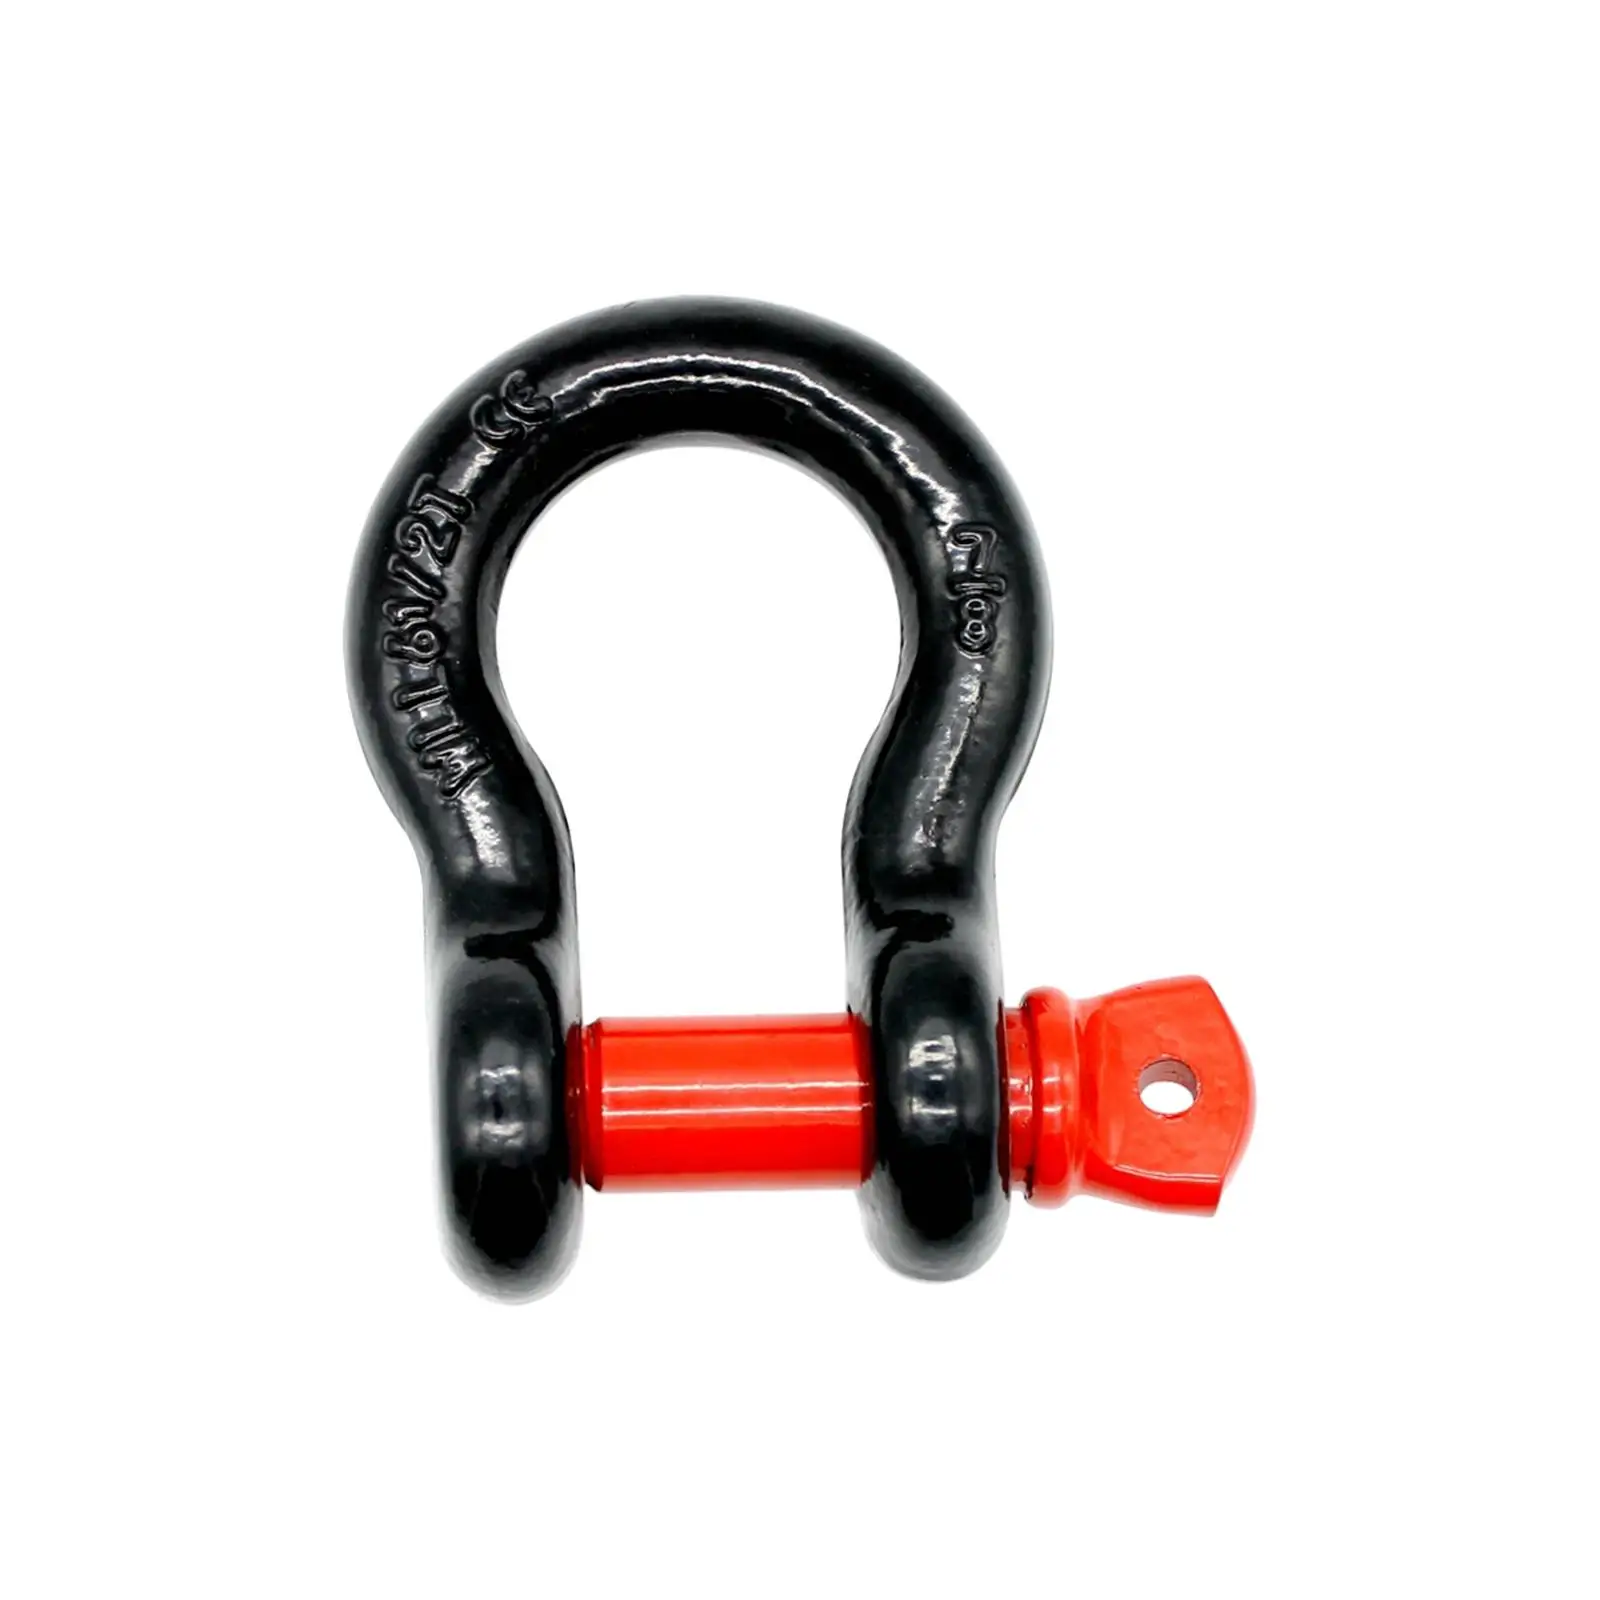 Tow Hook Sturdy Universally Tow Hook Trailer Tow Rope Shackles for Truck Vehicle Recovery Vehicle Easily Install